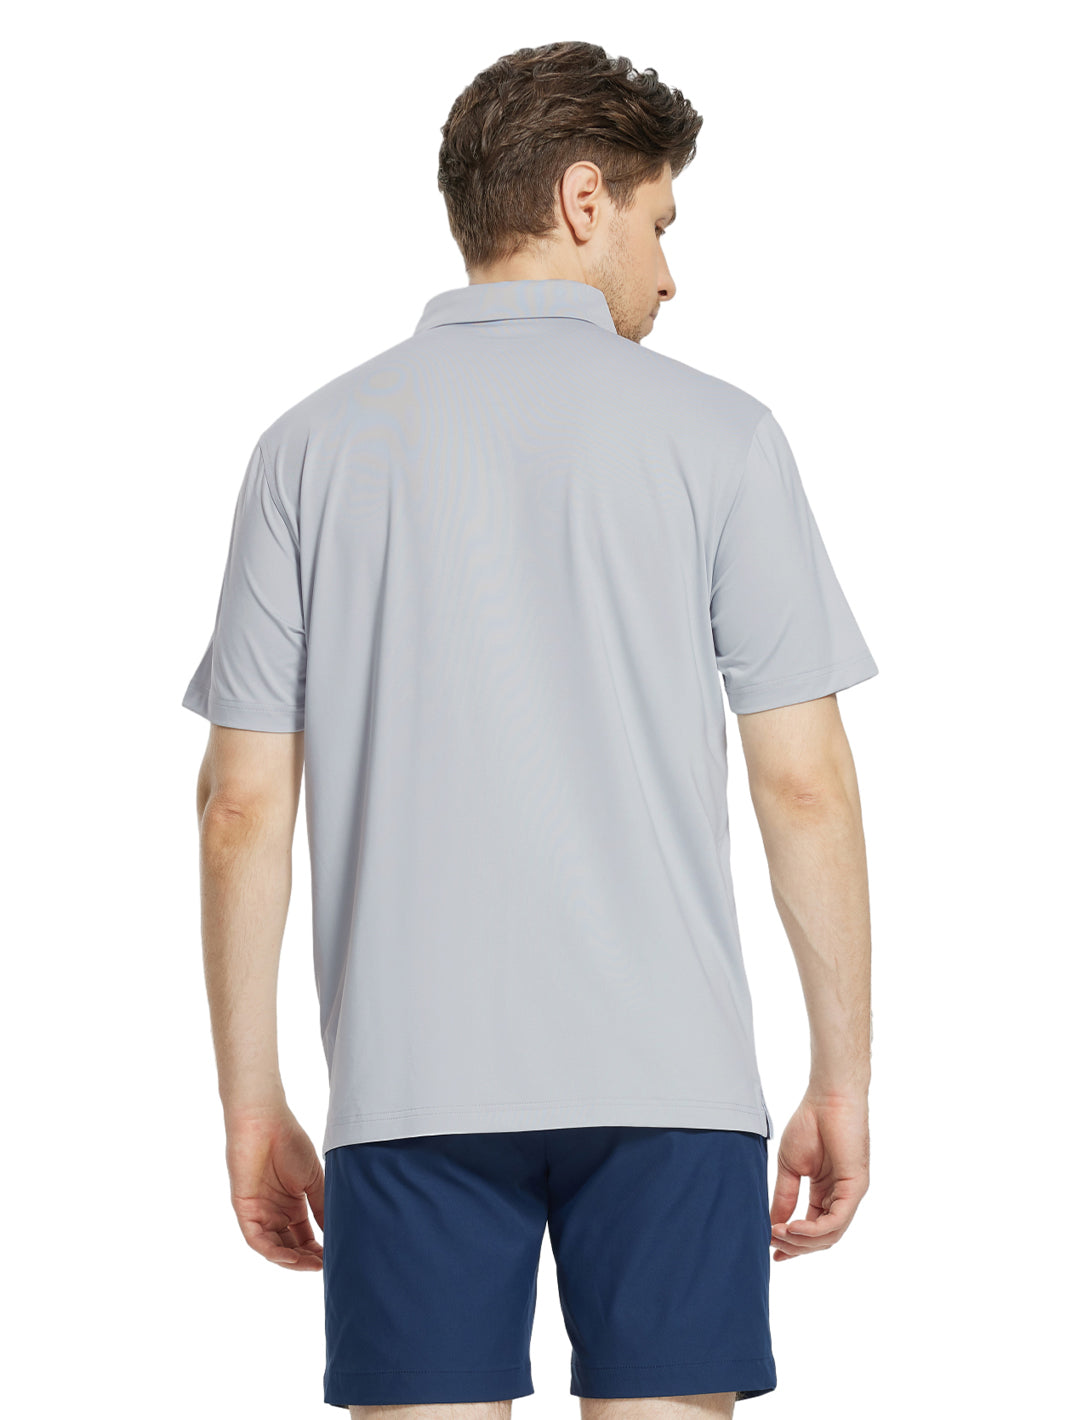 Men's Solid Jersey Golf Shirts-Silver Grey